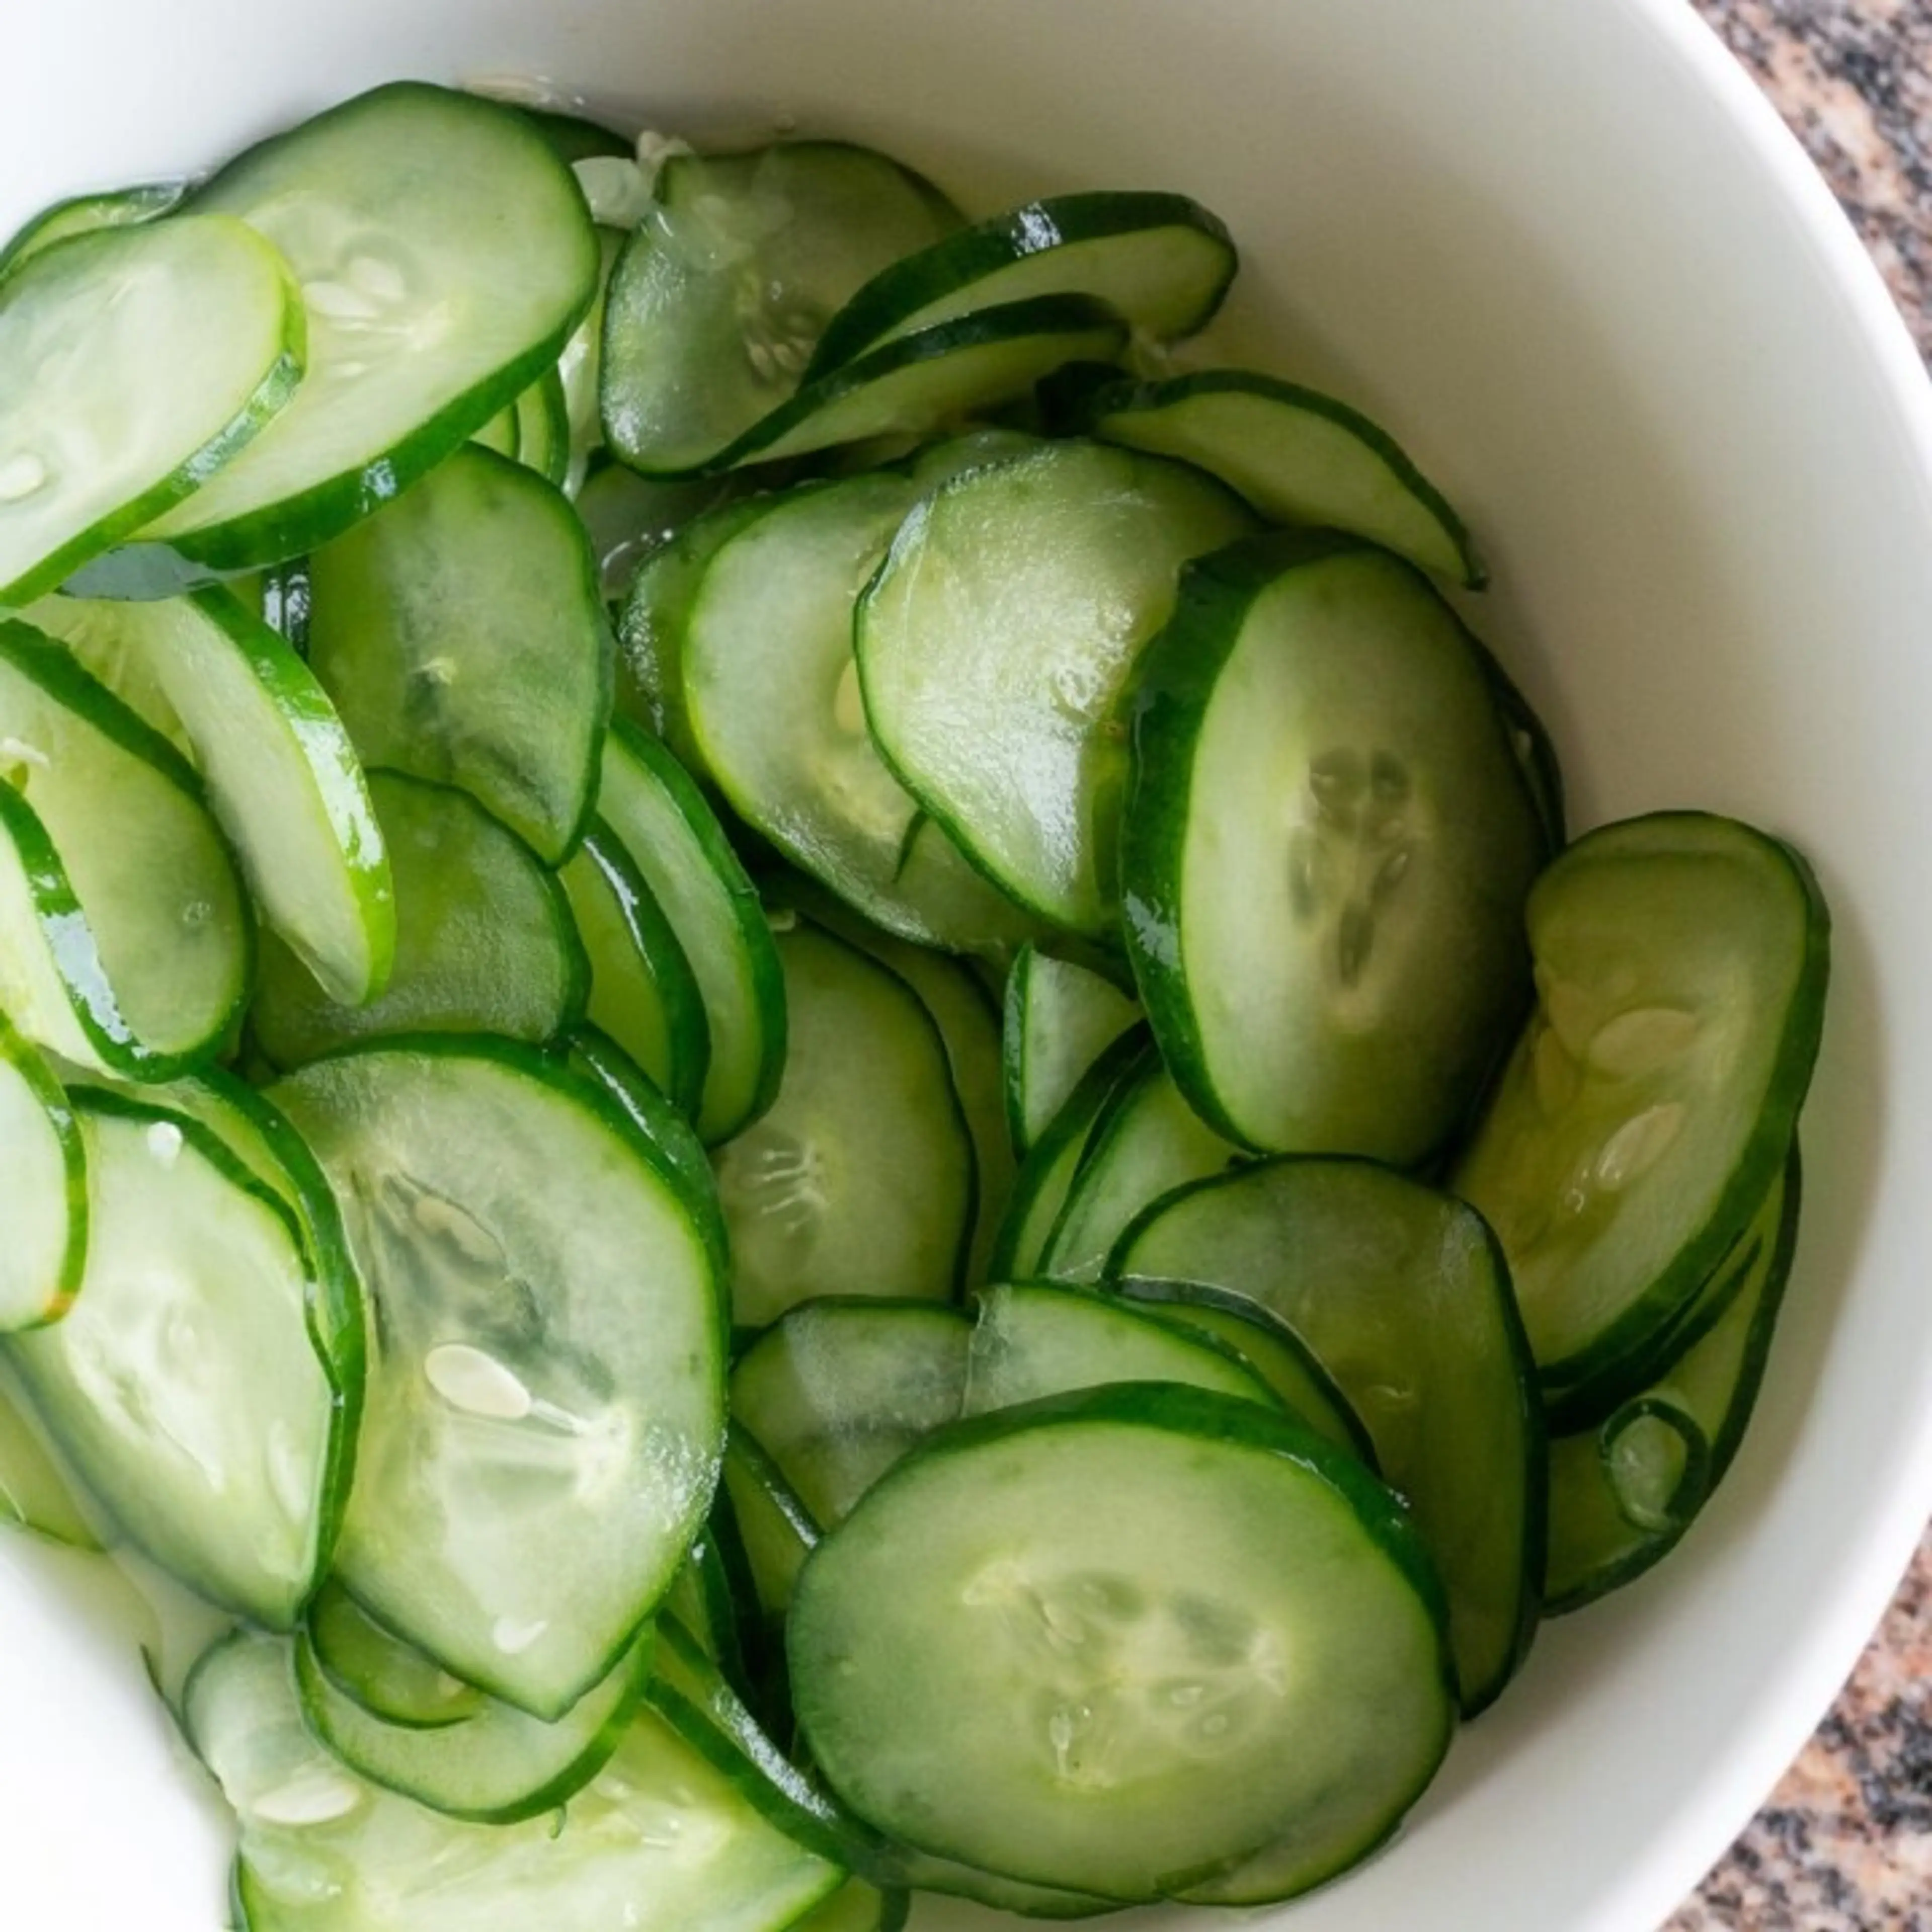 Japanese Pickled Cucumbers